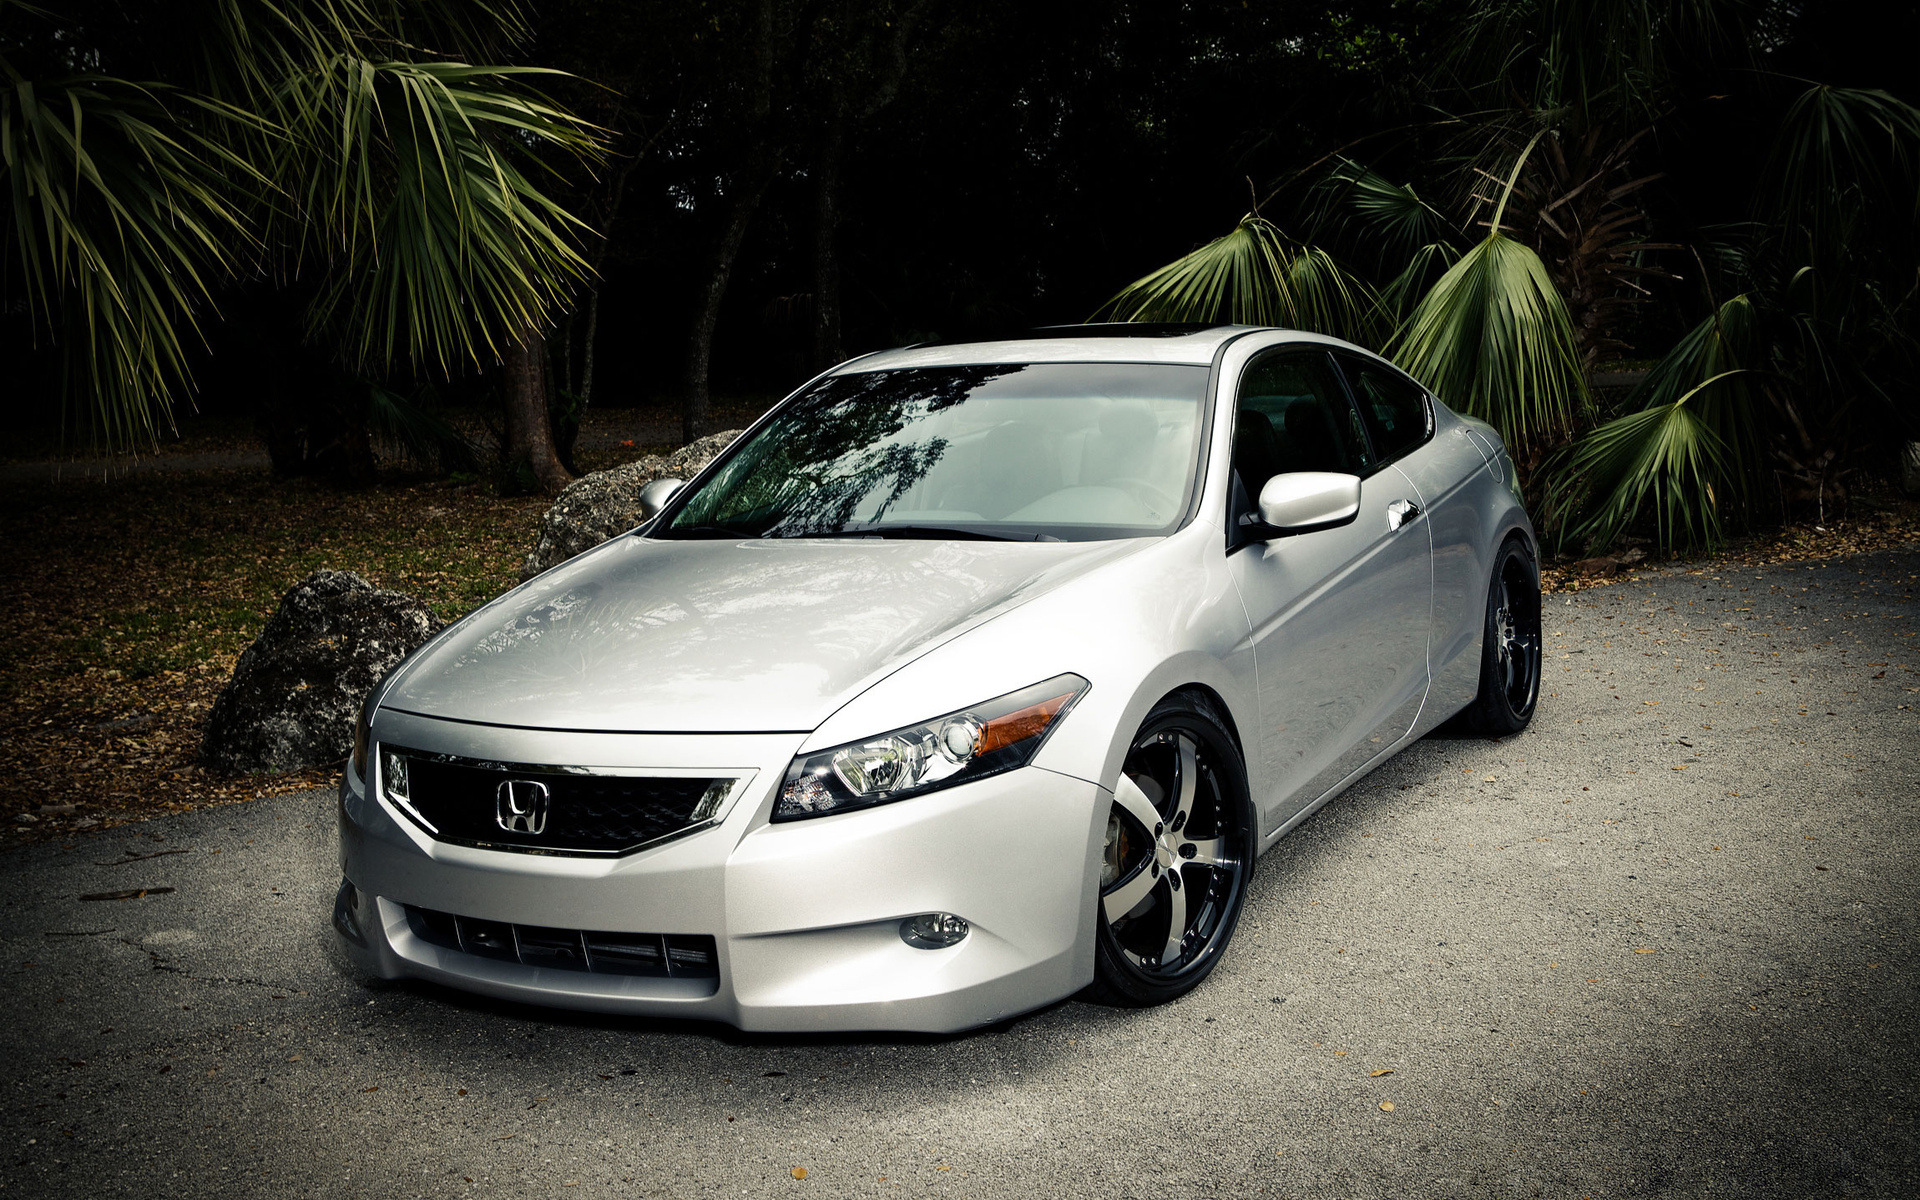 Honda Accord wallpaper and image, picture, photo